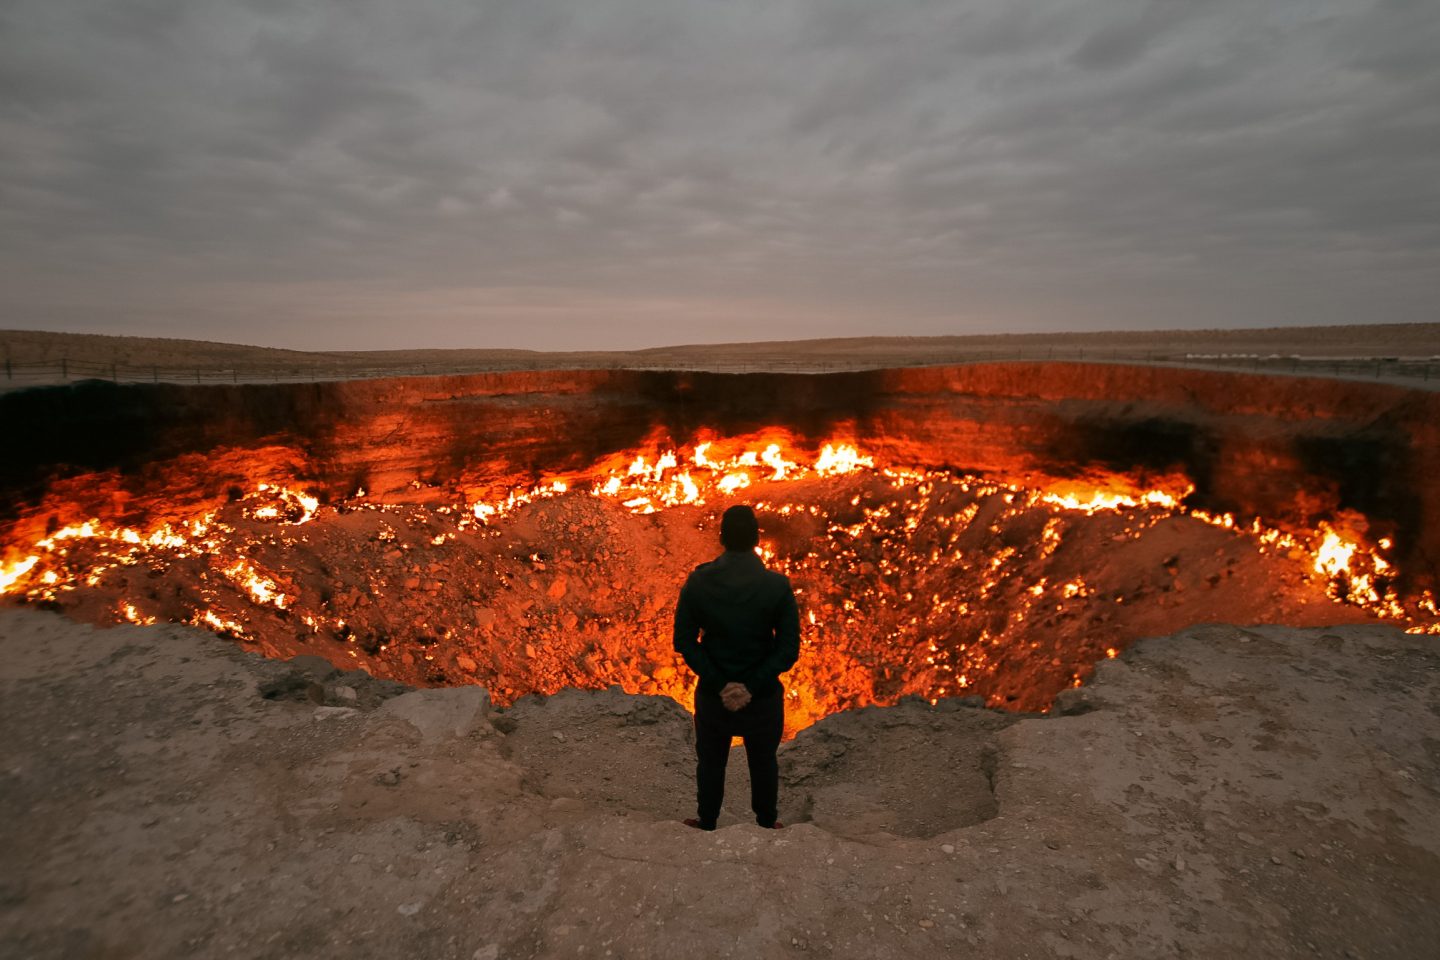 The door to hell at sunset